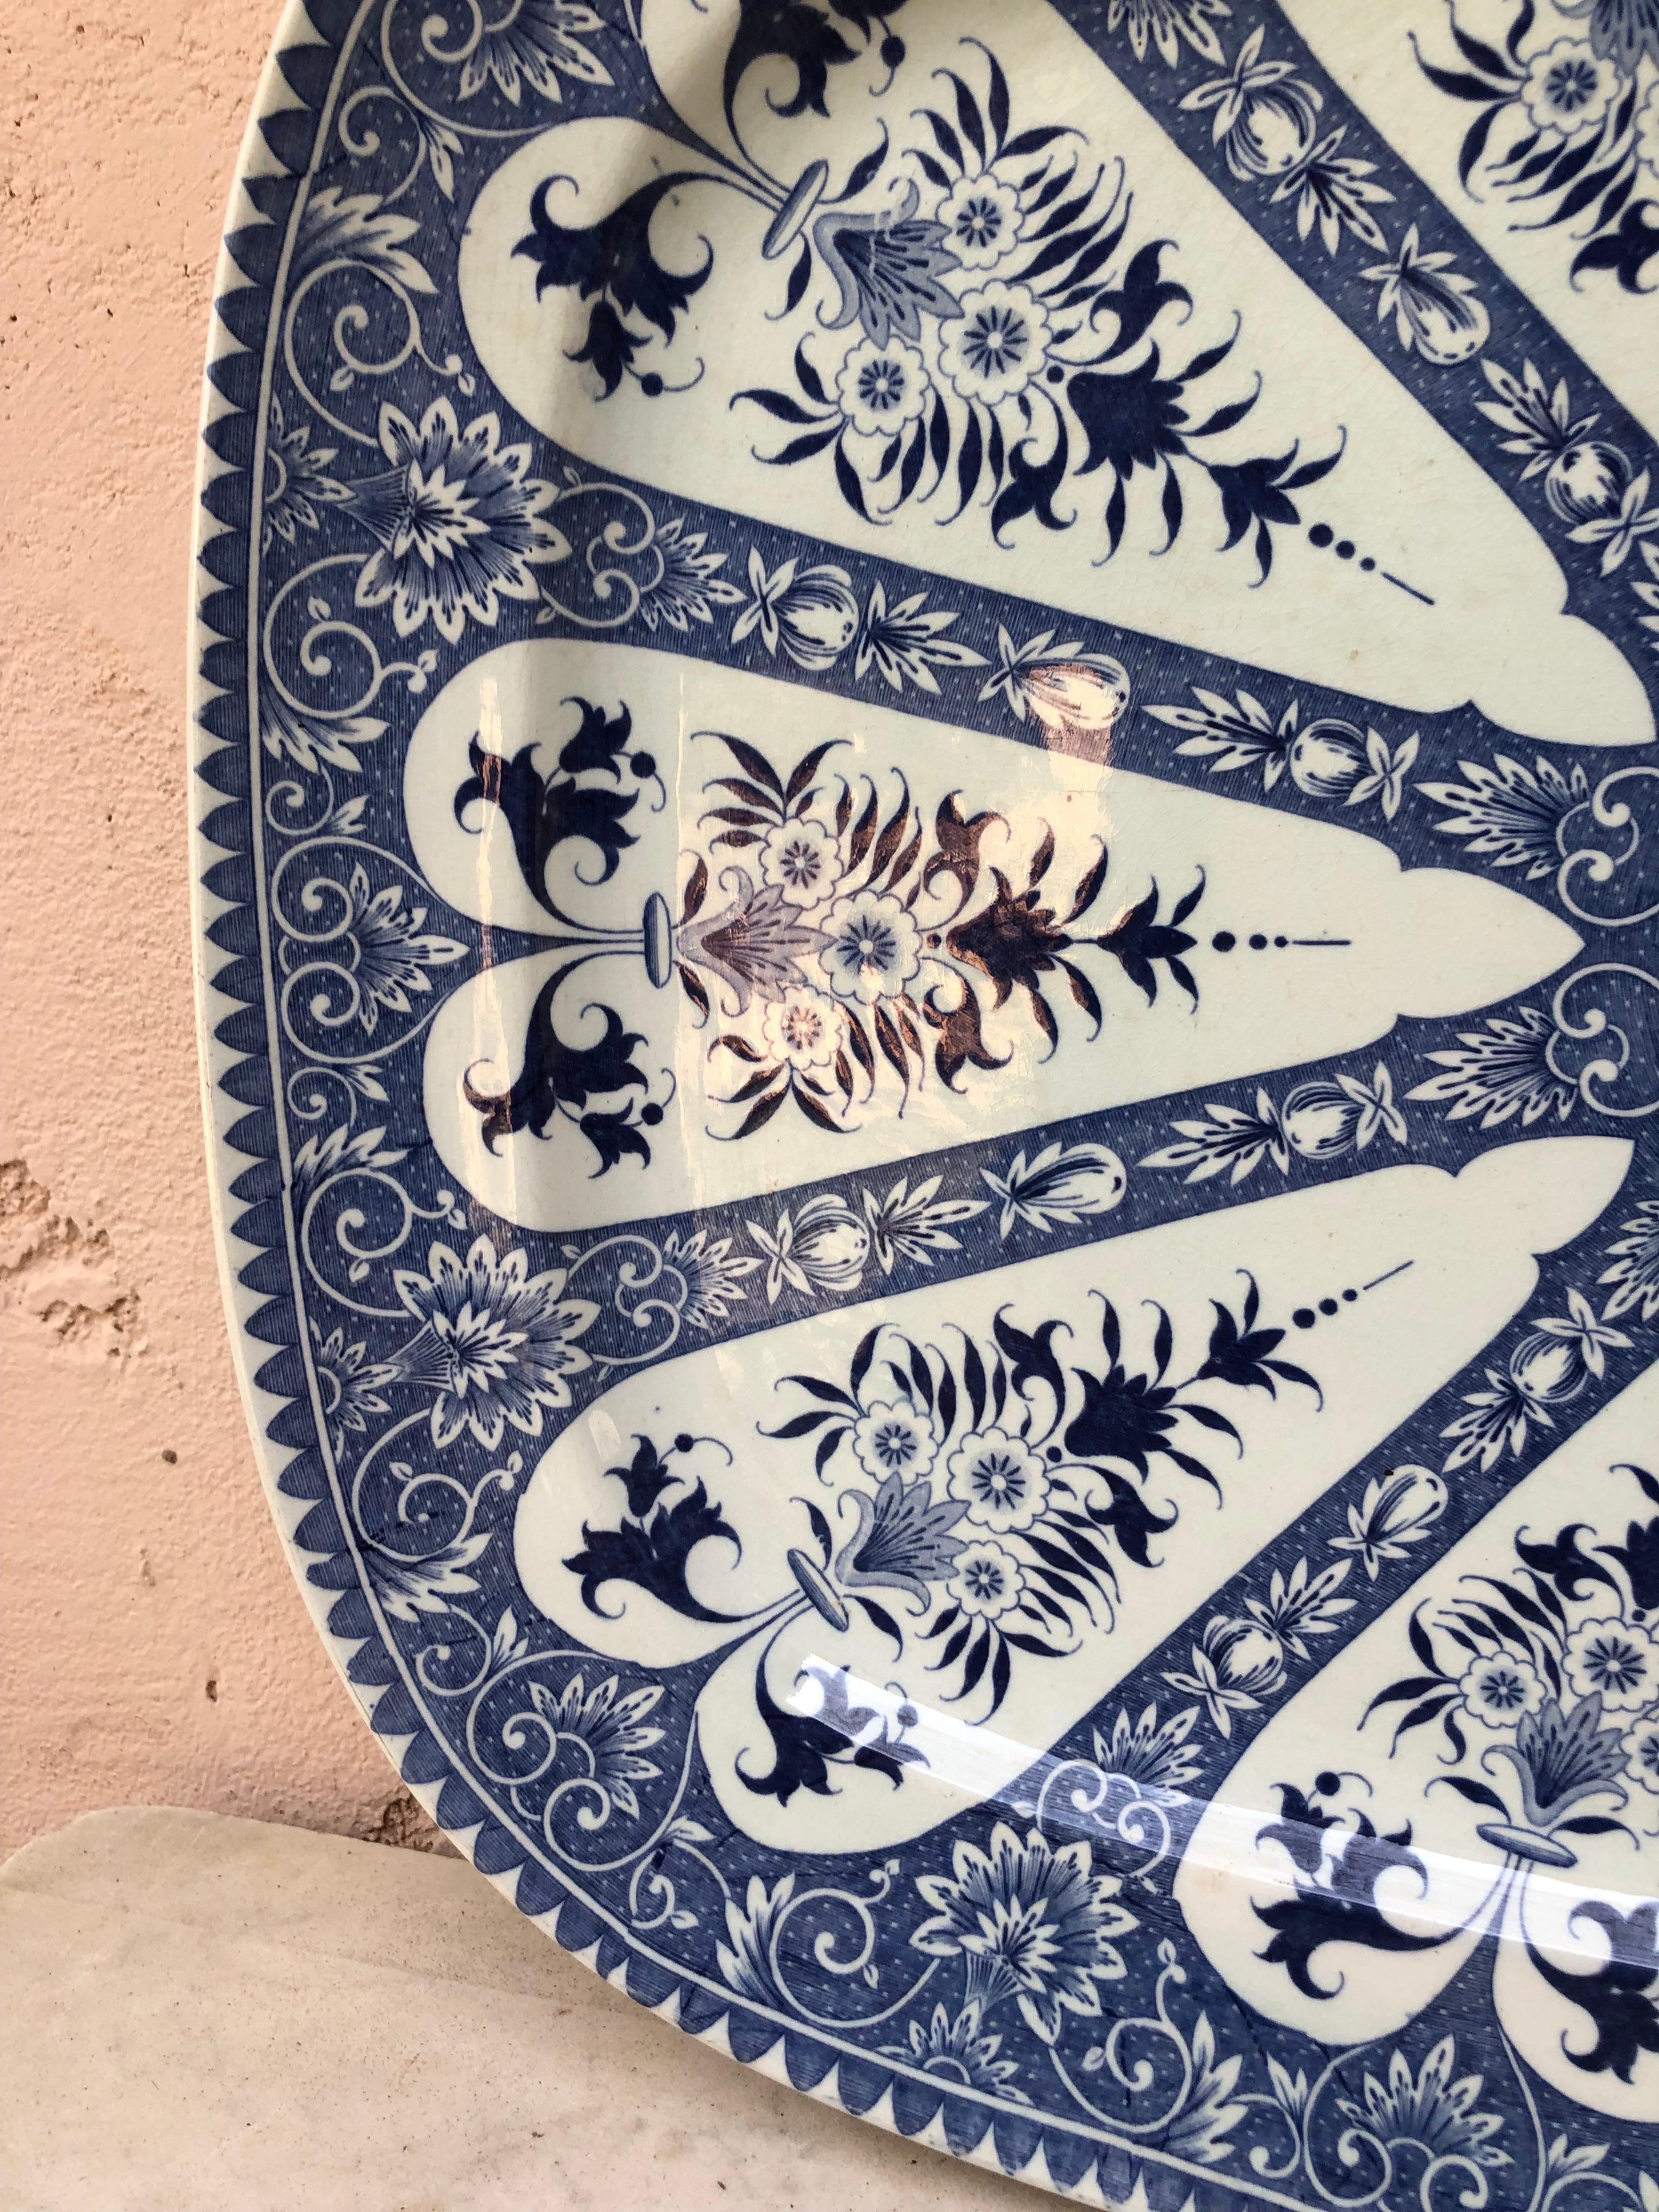 Rare 19th century oversize blue & white Faience Platter signed Sarreguemines, service Francois.
Probably a meat platter.
Measures: 18 inches by 14 inches.